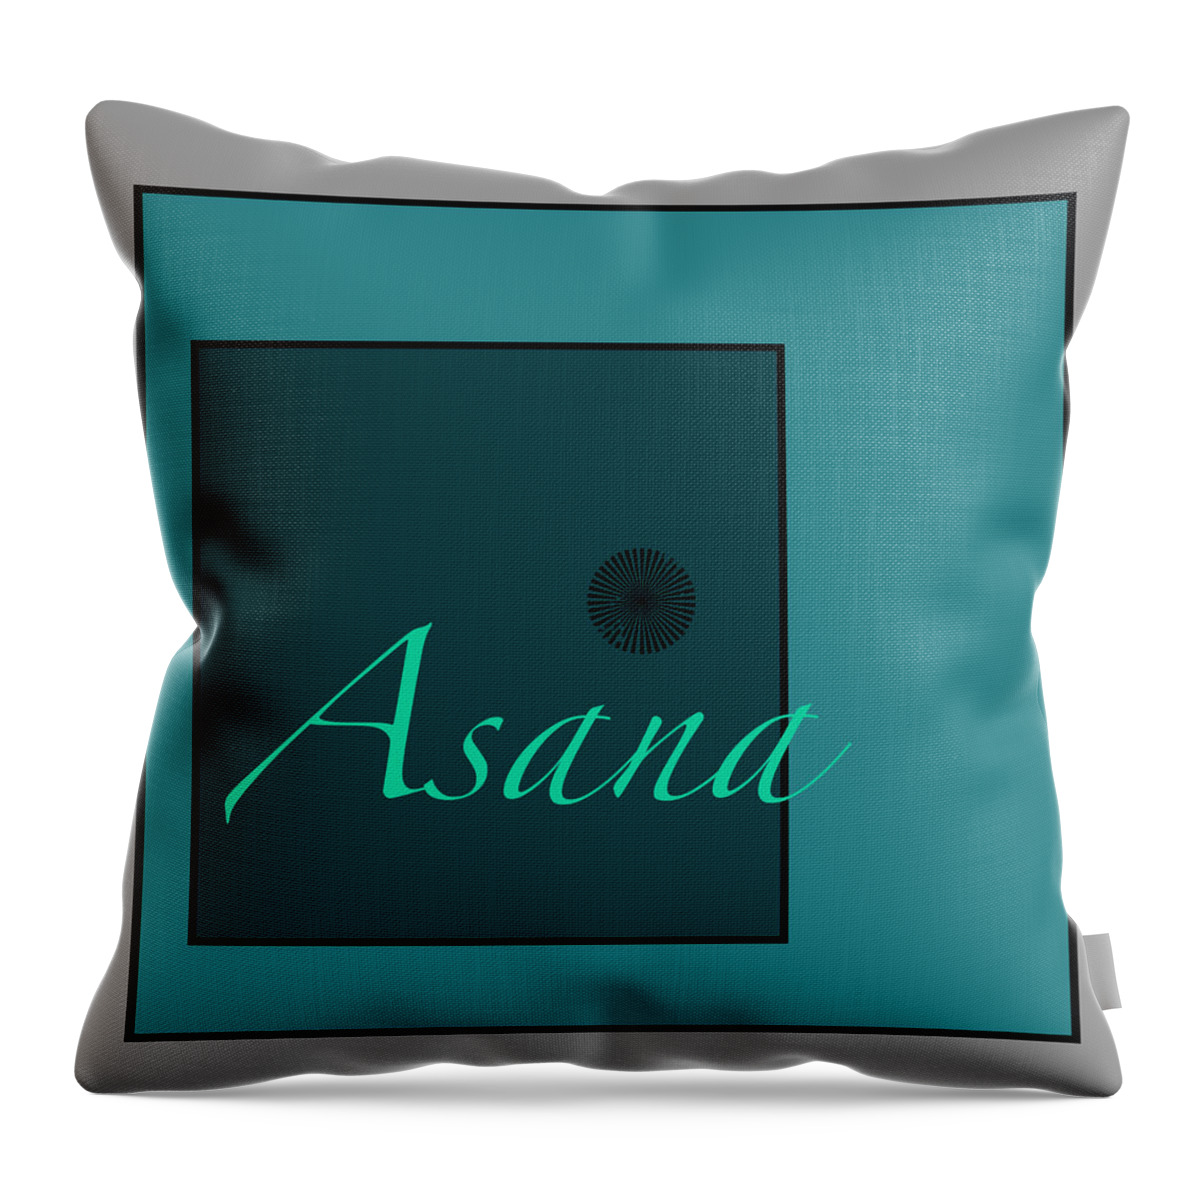 Artistic Throw Pillow featuring the digital art Asana In Blue by Kandy Hurley